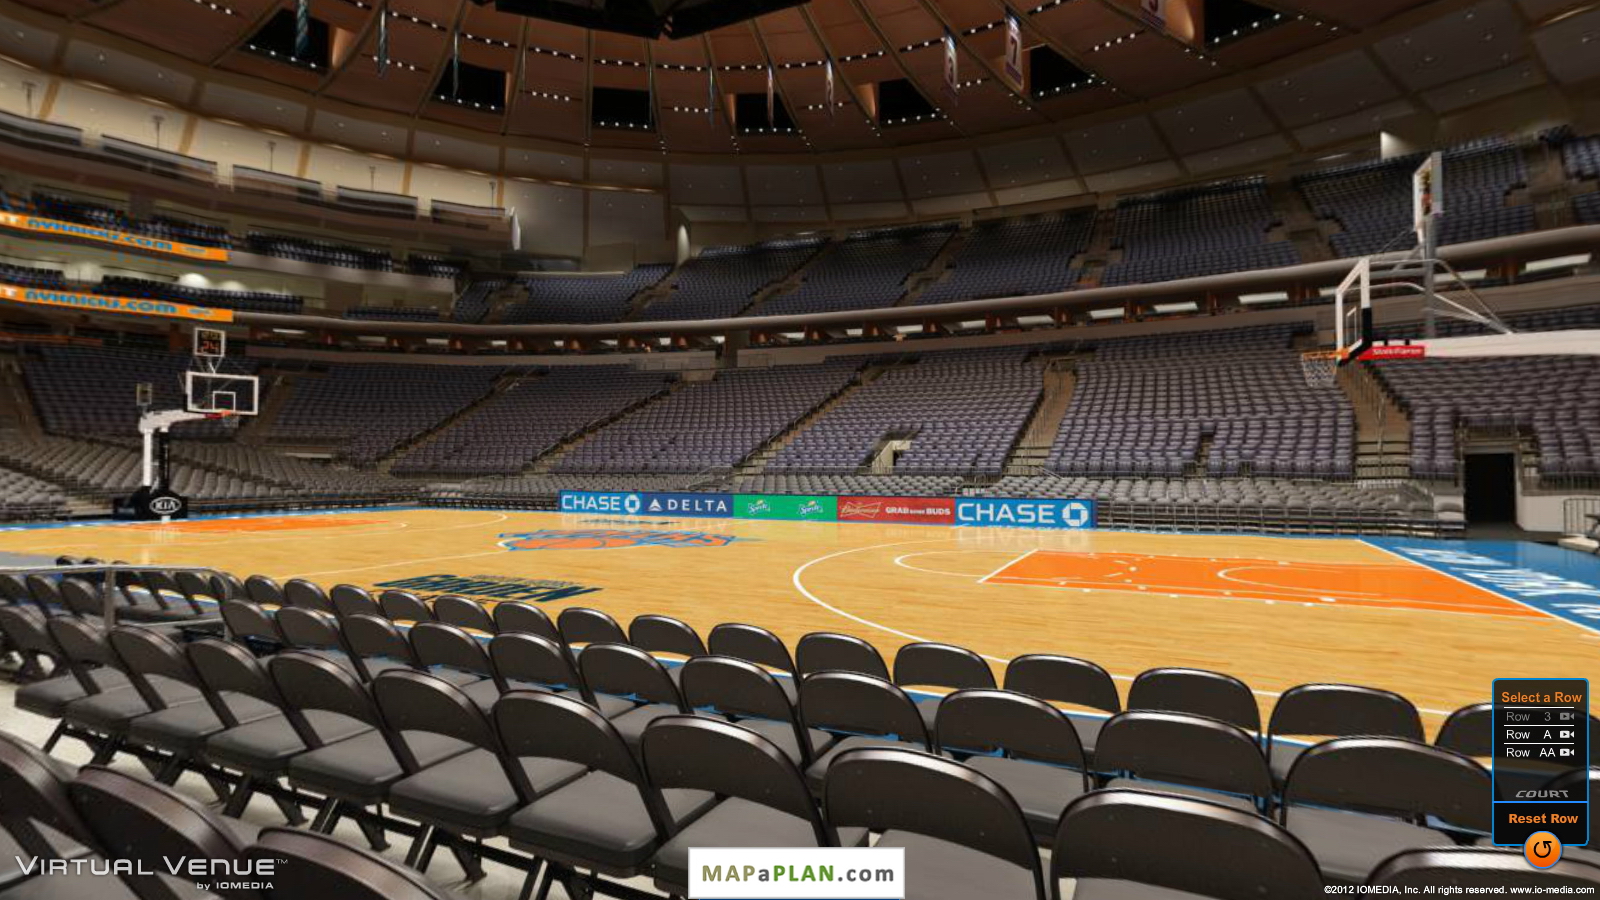 Madison square garden seating chart View from section 12